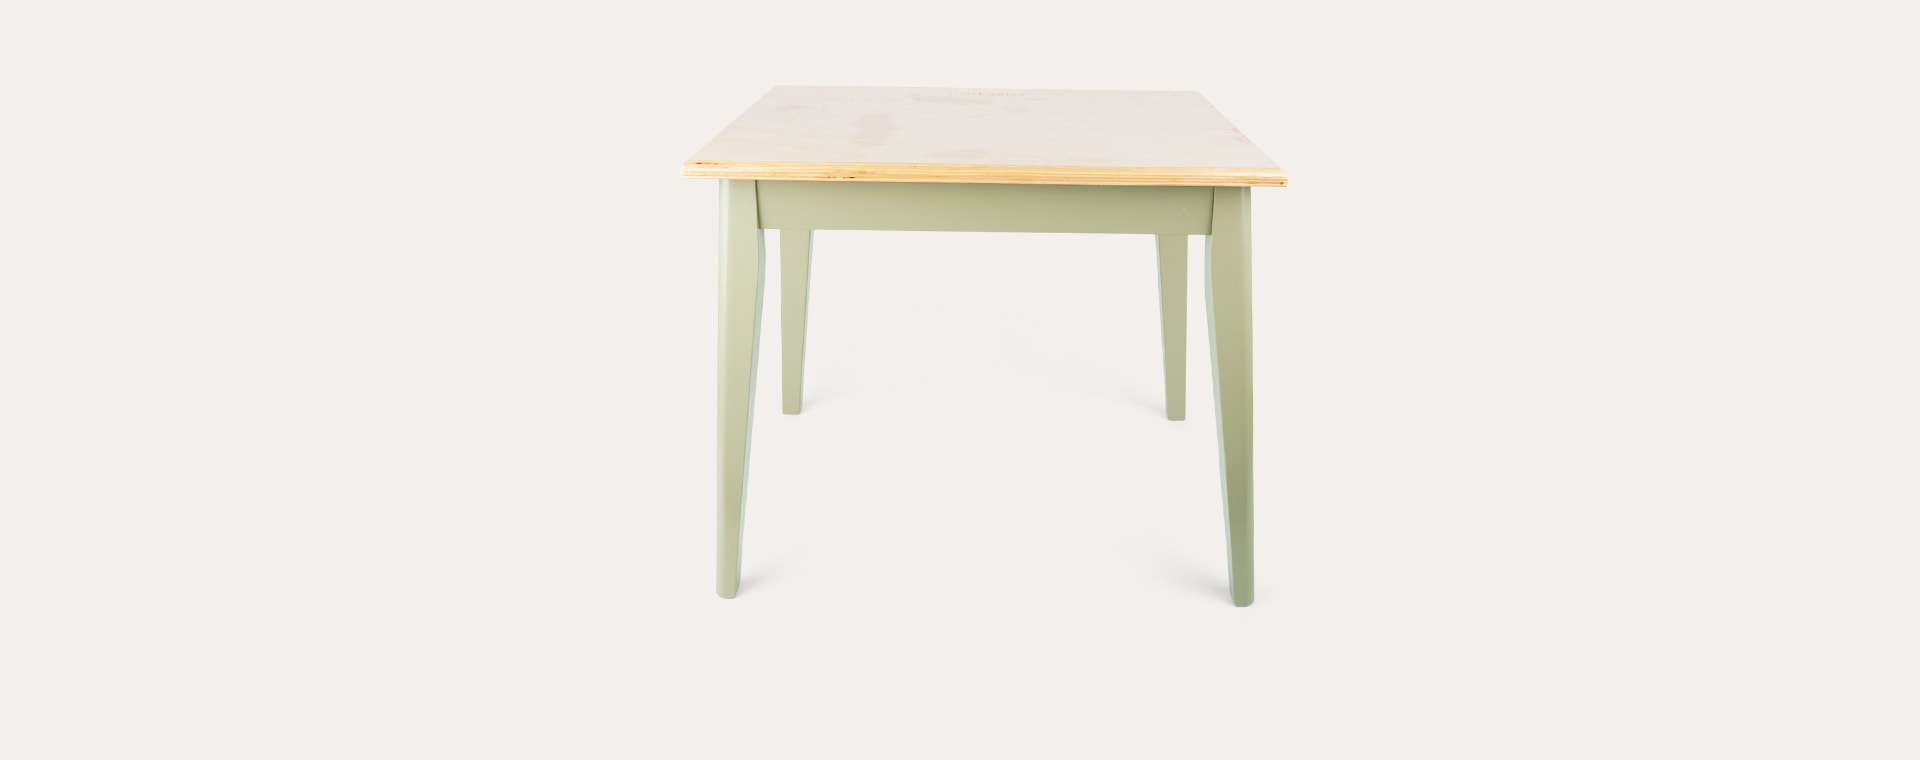 Olive Little Dutch Table